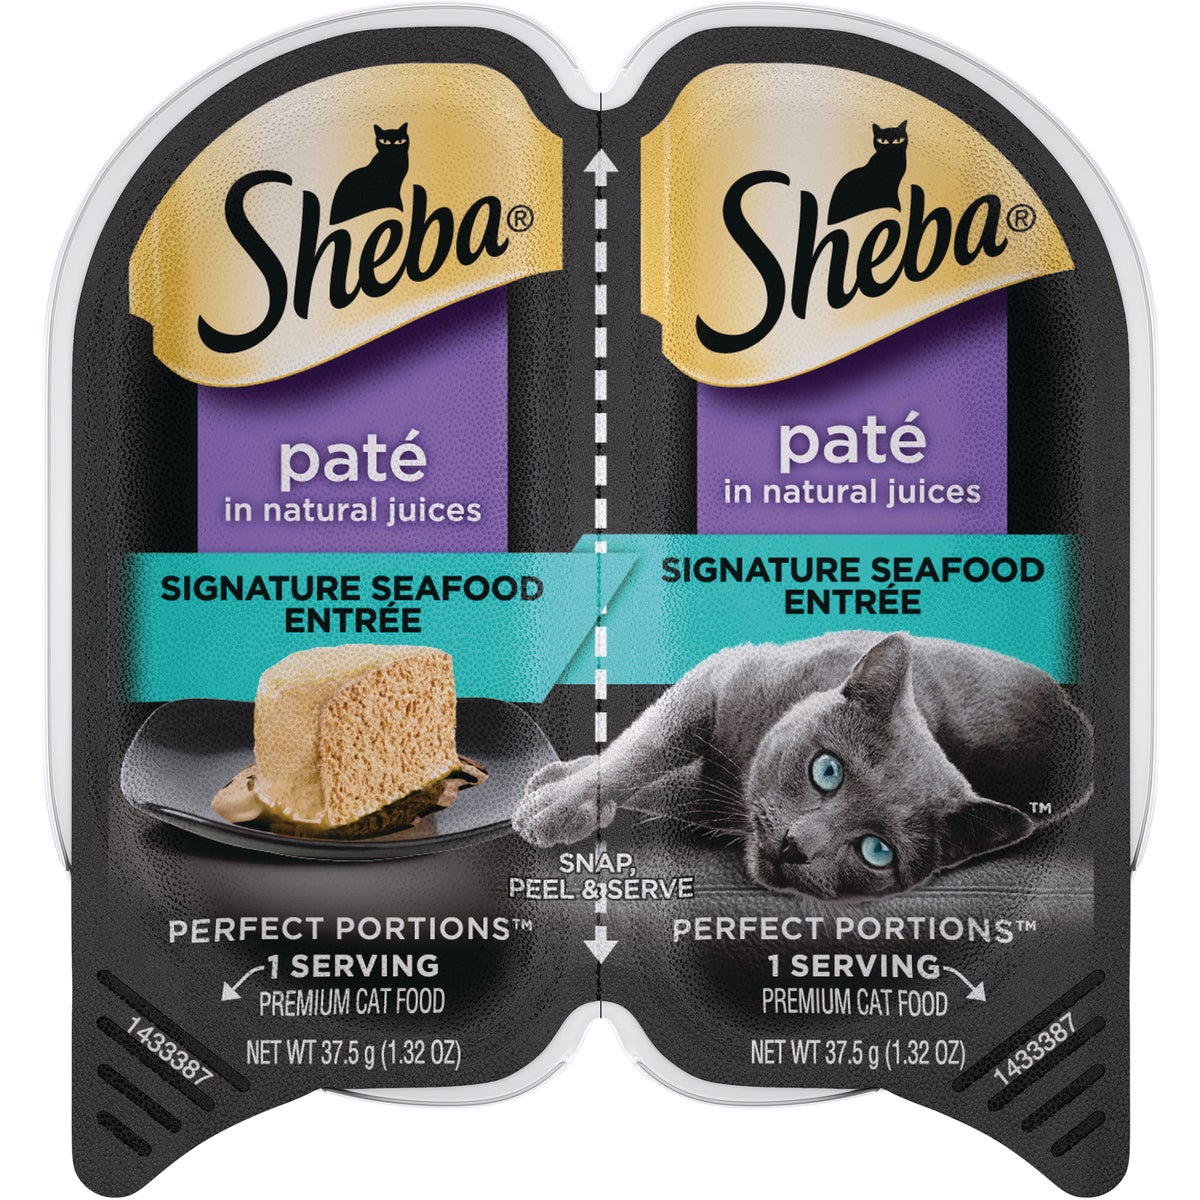 Sheba Perfect Portions Pate 2.6 Oz. Adult Signature Seafood Wet Cat Food